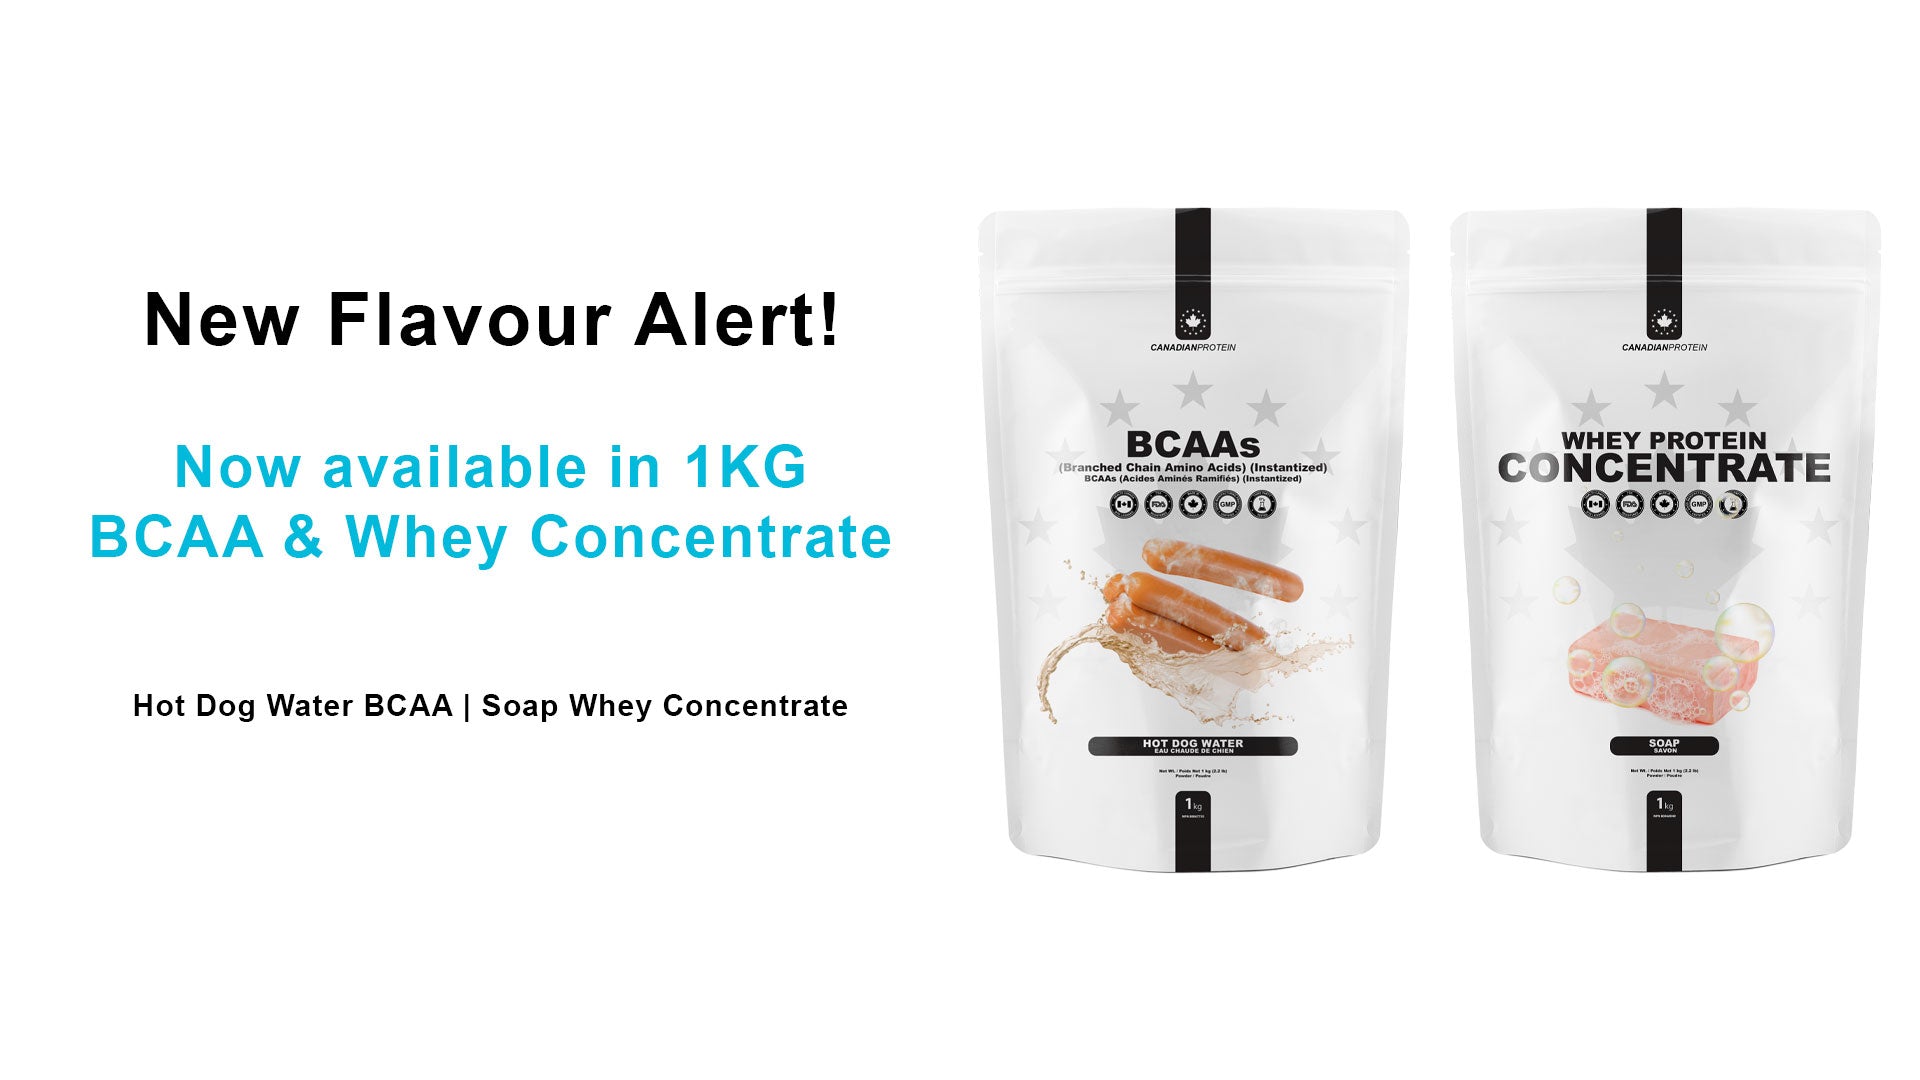 Introducing New BCAA and Whey Protein Concentrate Flavours!